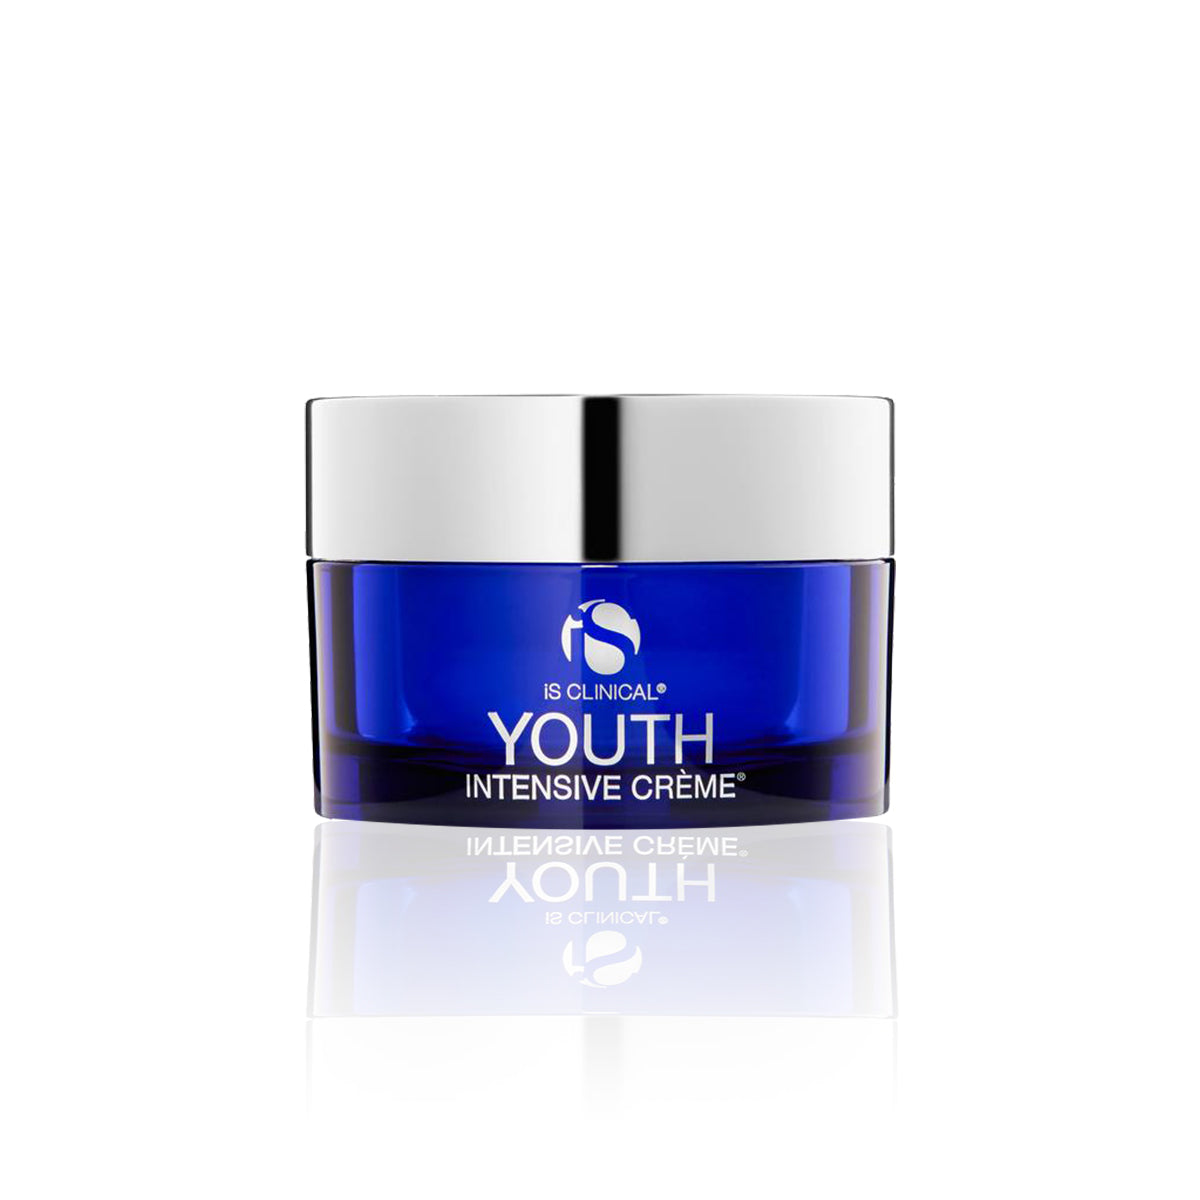 IS CLINICAL Youth Regenerating Instant Cream | Youth Intensive Creme 50g 